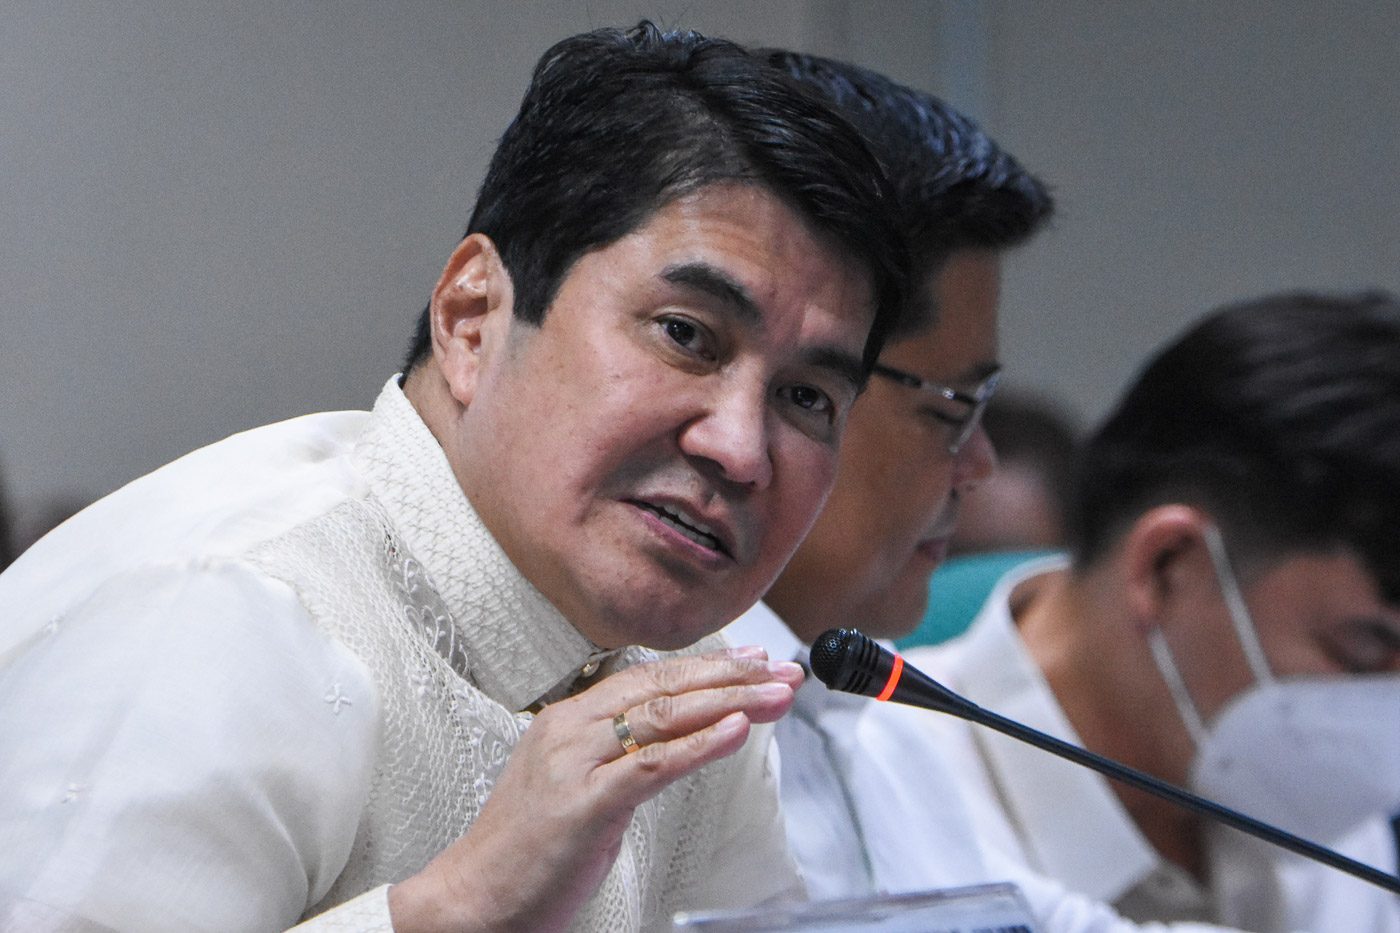 Petitioner seeks reversal of Comelec ruling on Erwin Tulfo DQ case